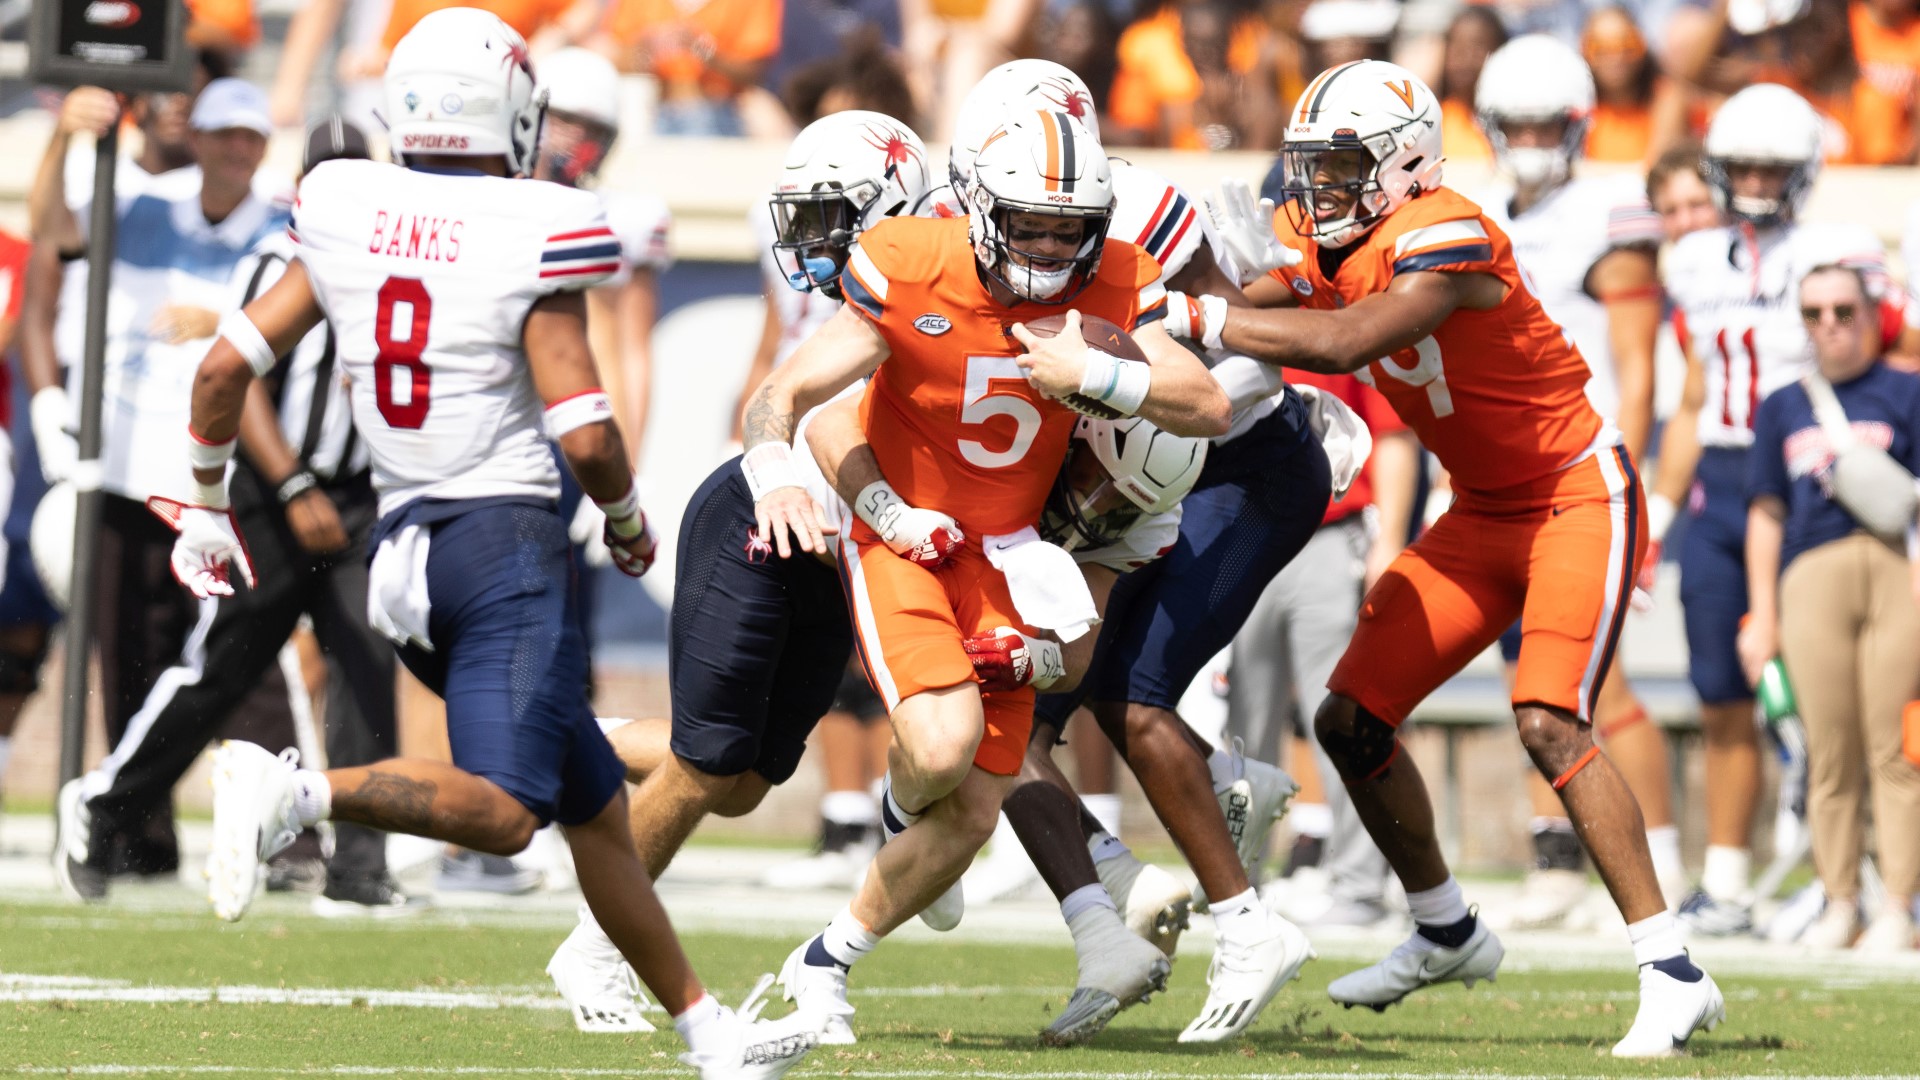 The Hoos were almost blanked by the Fighting Illini on Saturday afternoon, 24-3 in their first game on the road against the Big 10 team.